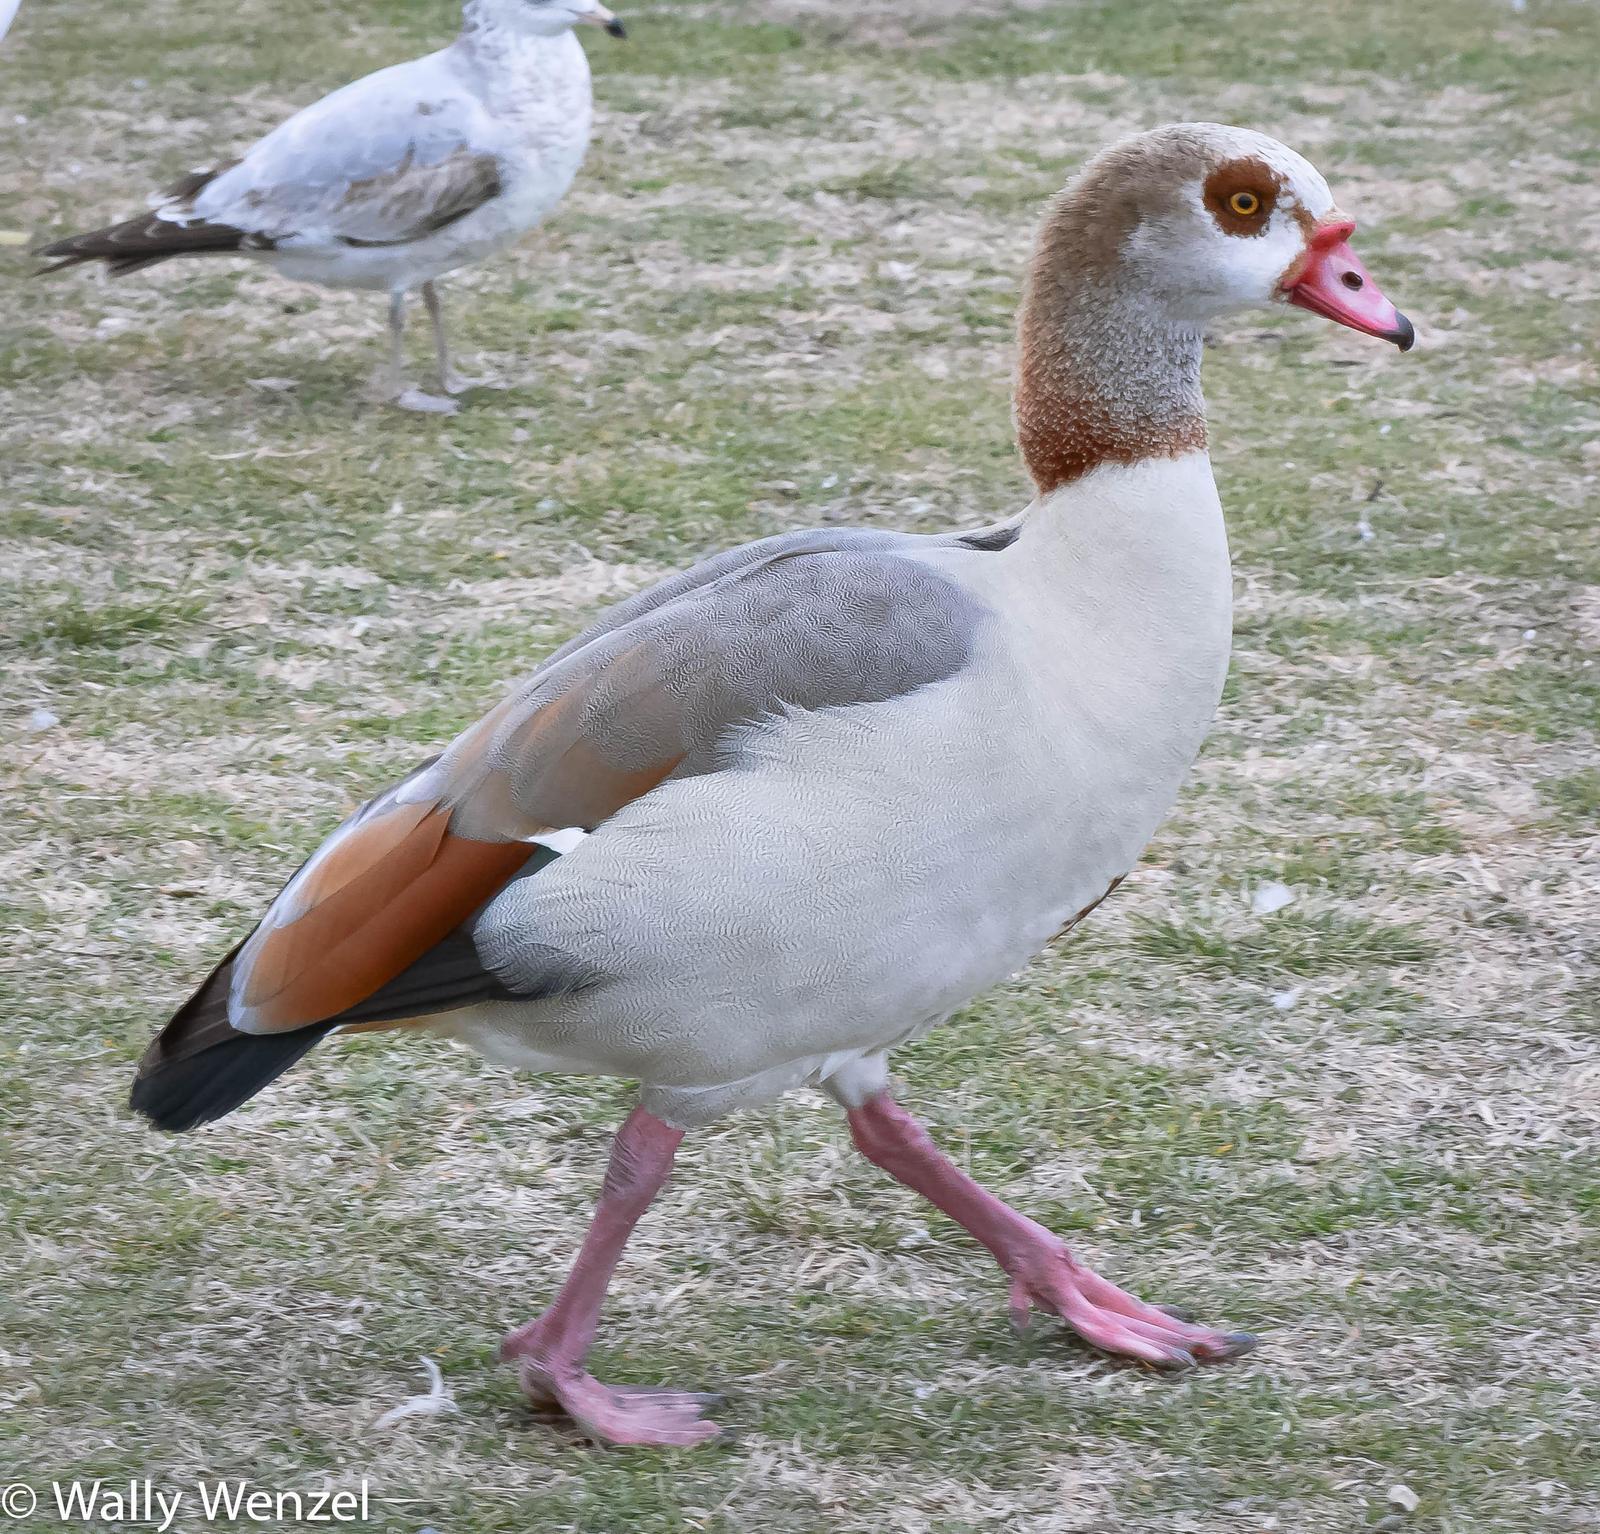 Egyptian Goose Photo by Wally Wenzel